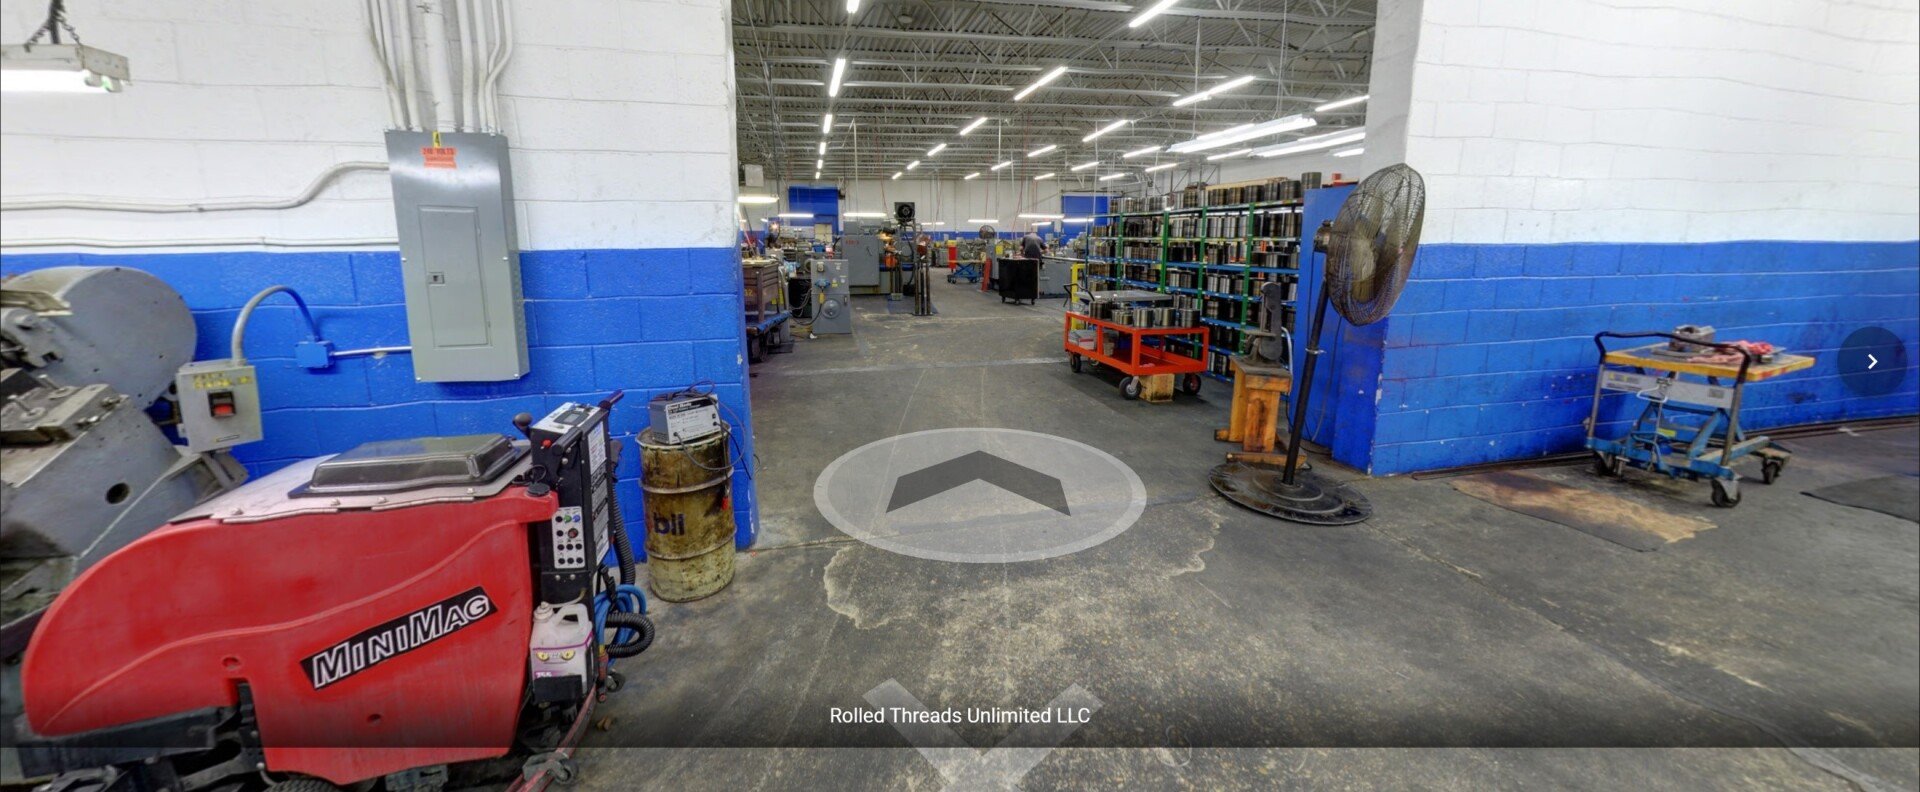 Preview 360 Image of Rolled Threads warehouse on Google